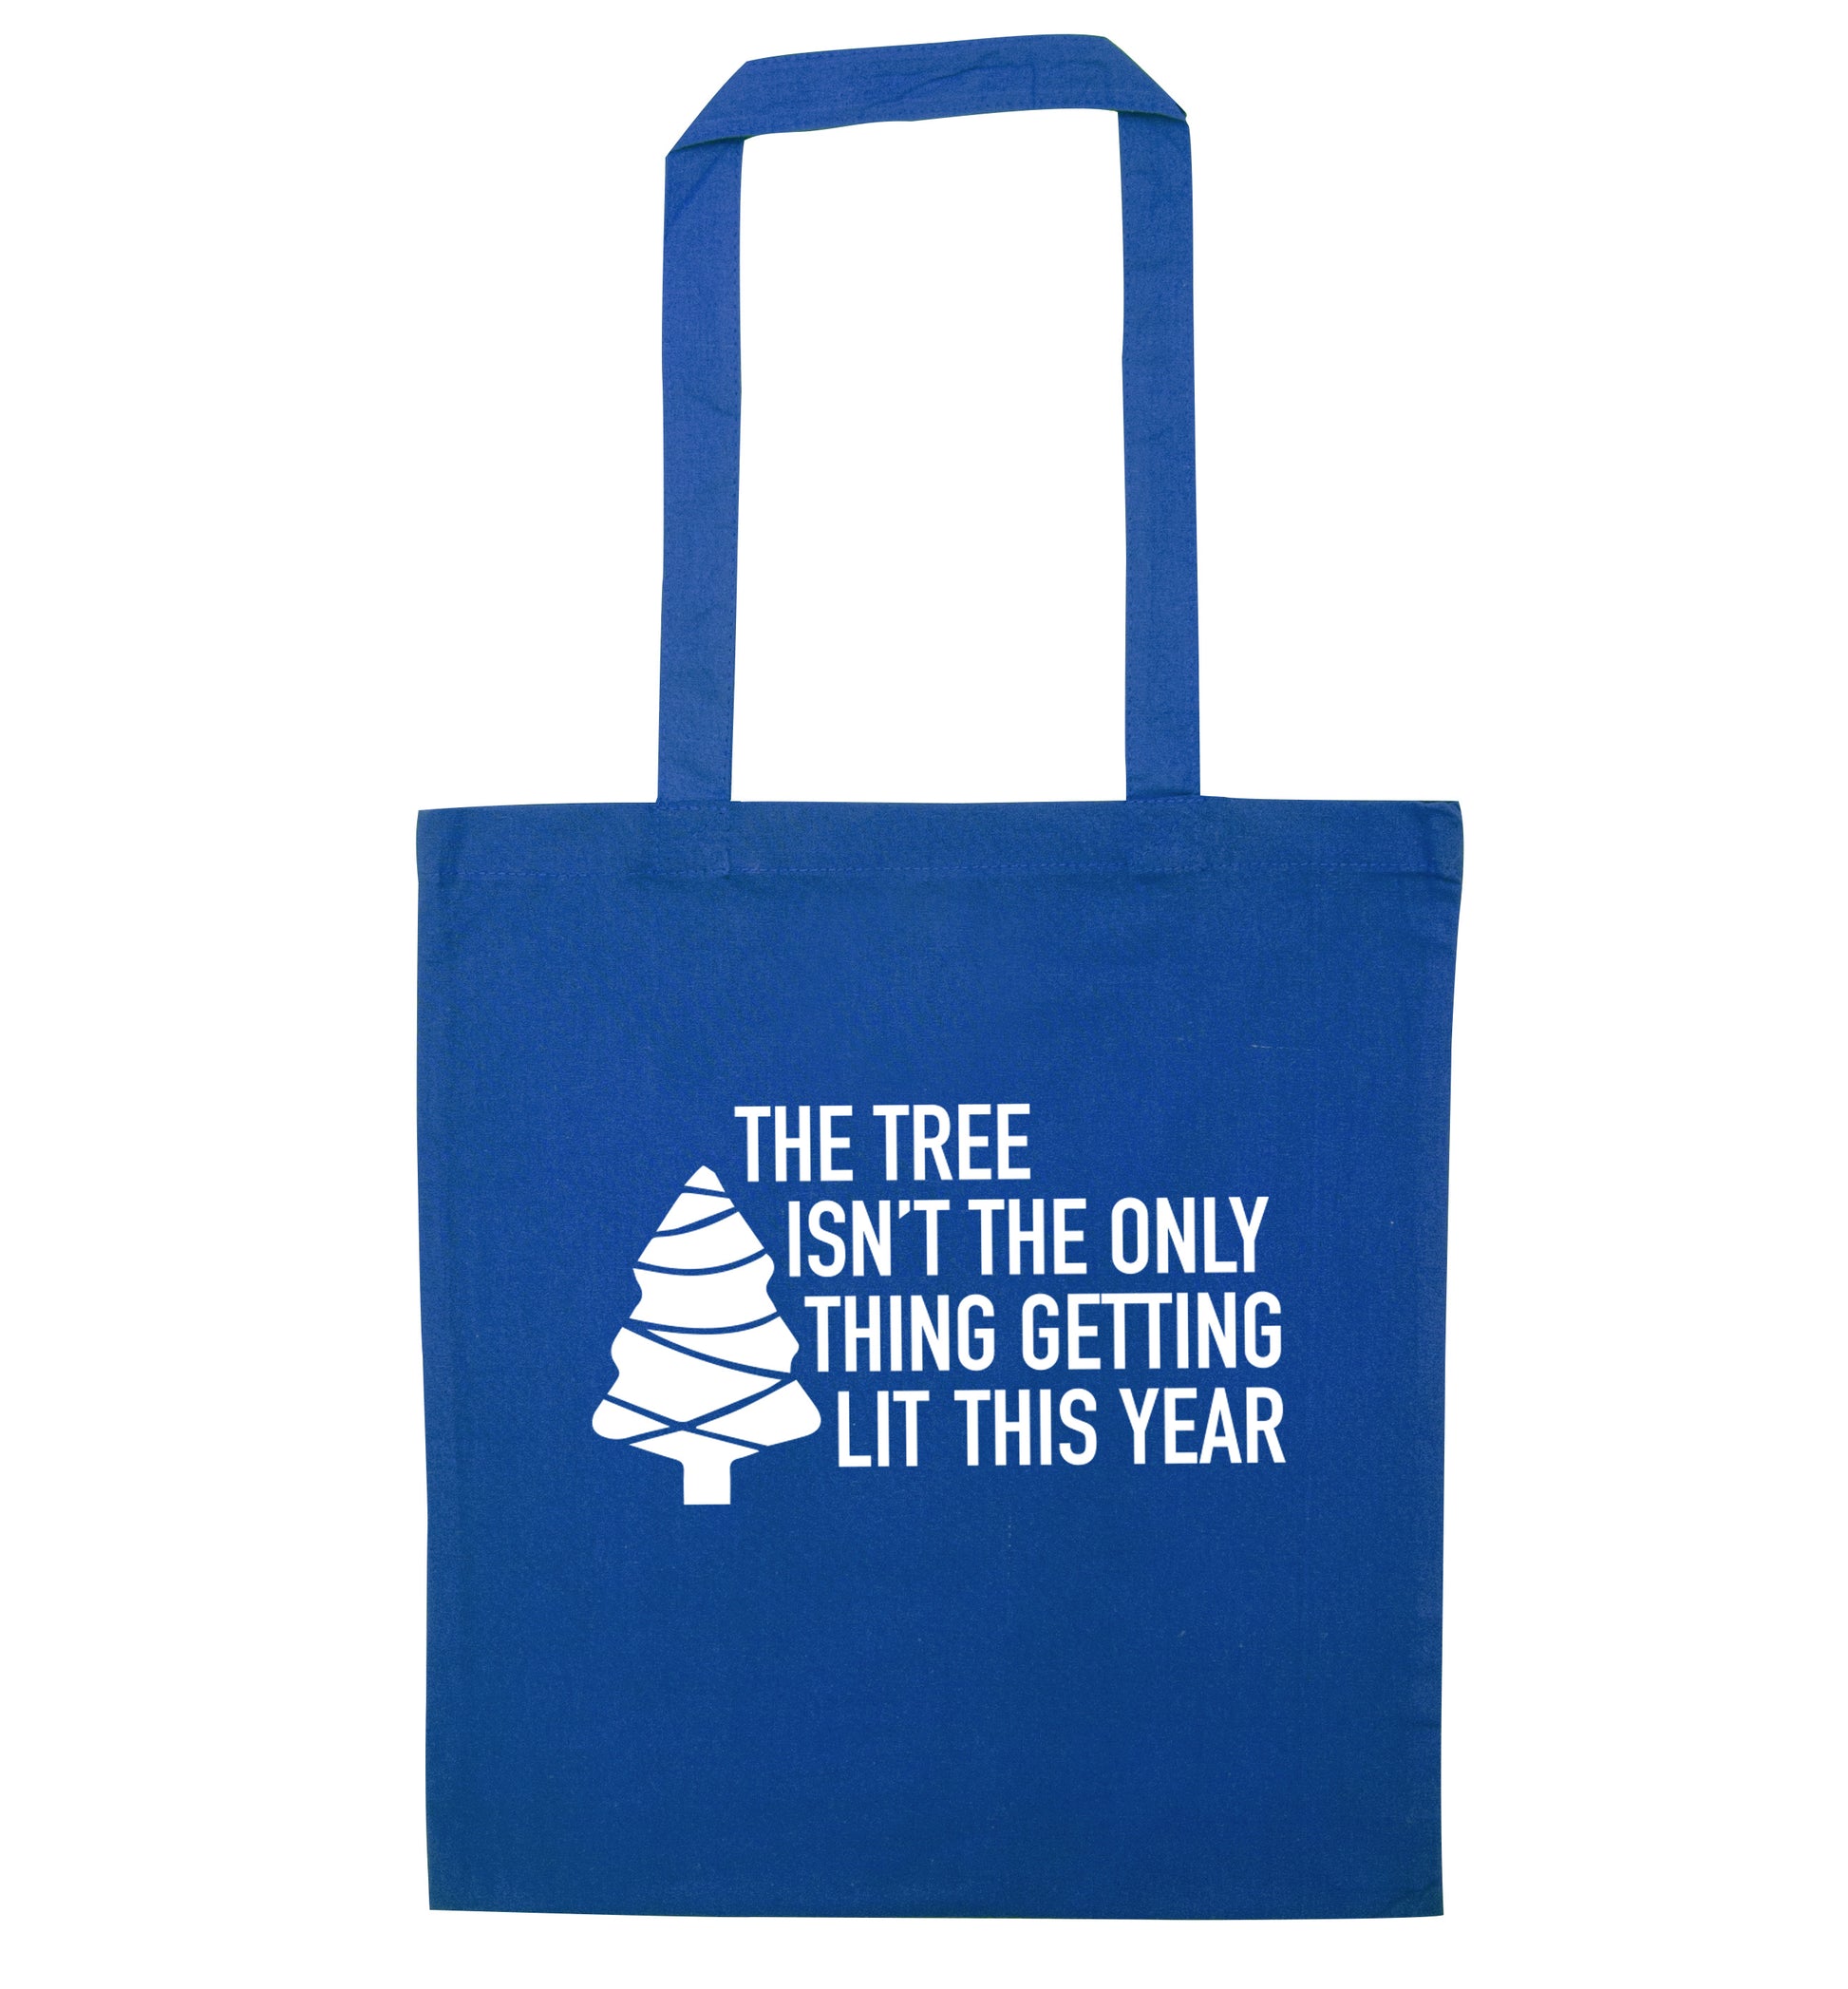 The tree isn't the only thing getting lit this year blue tote bag